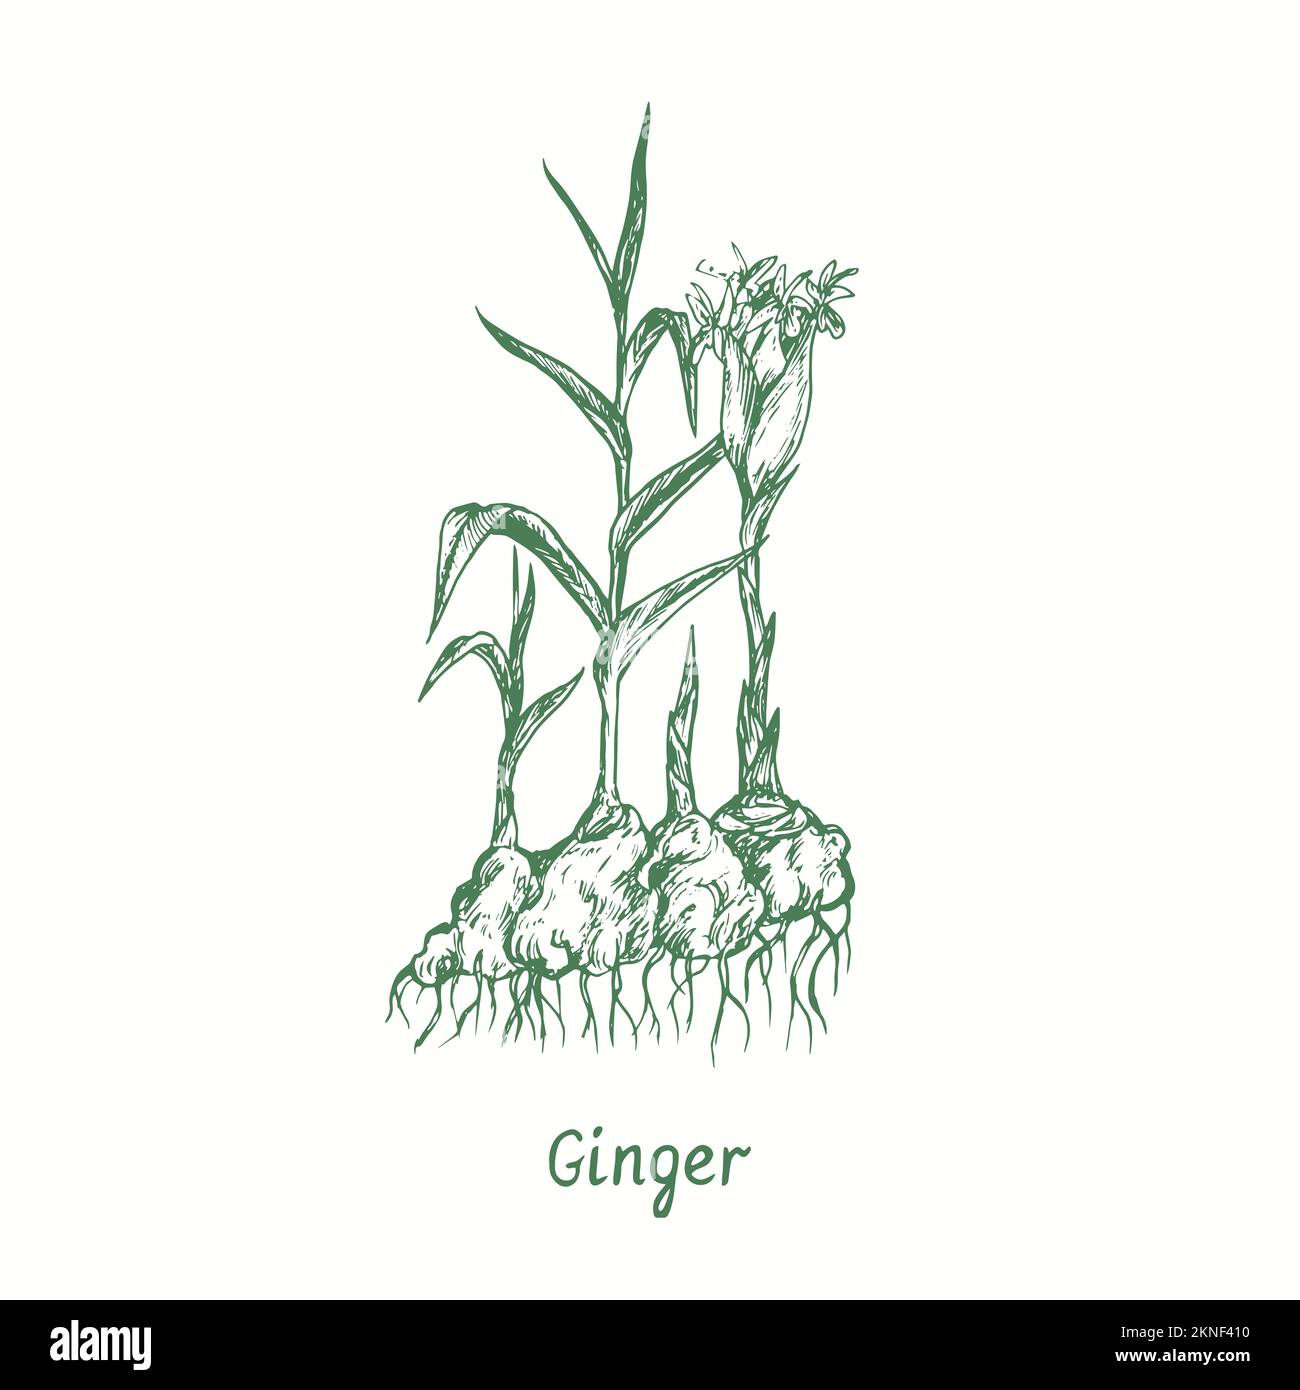 Ginger (Zingiber officinale) plant, root and leaves.  Ink black and white doodle drawing in woodcut style Stock Photo